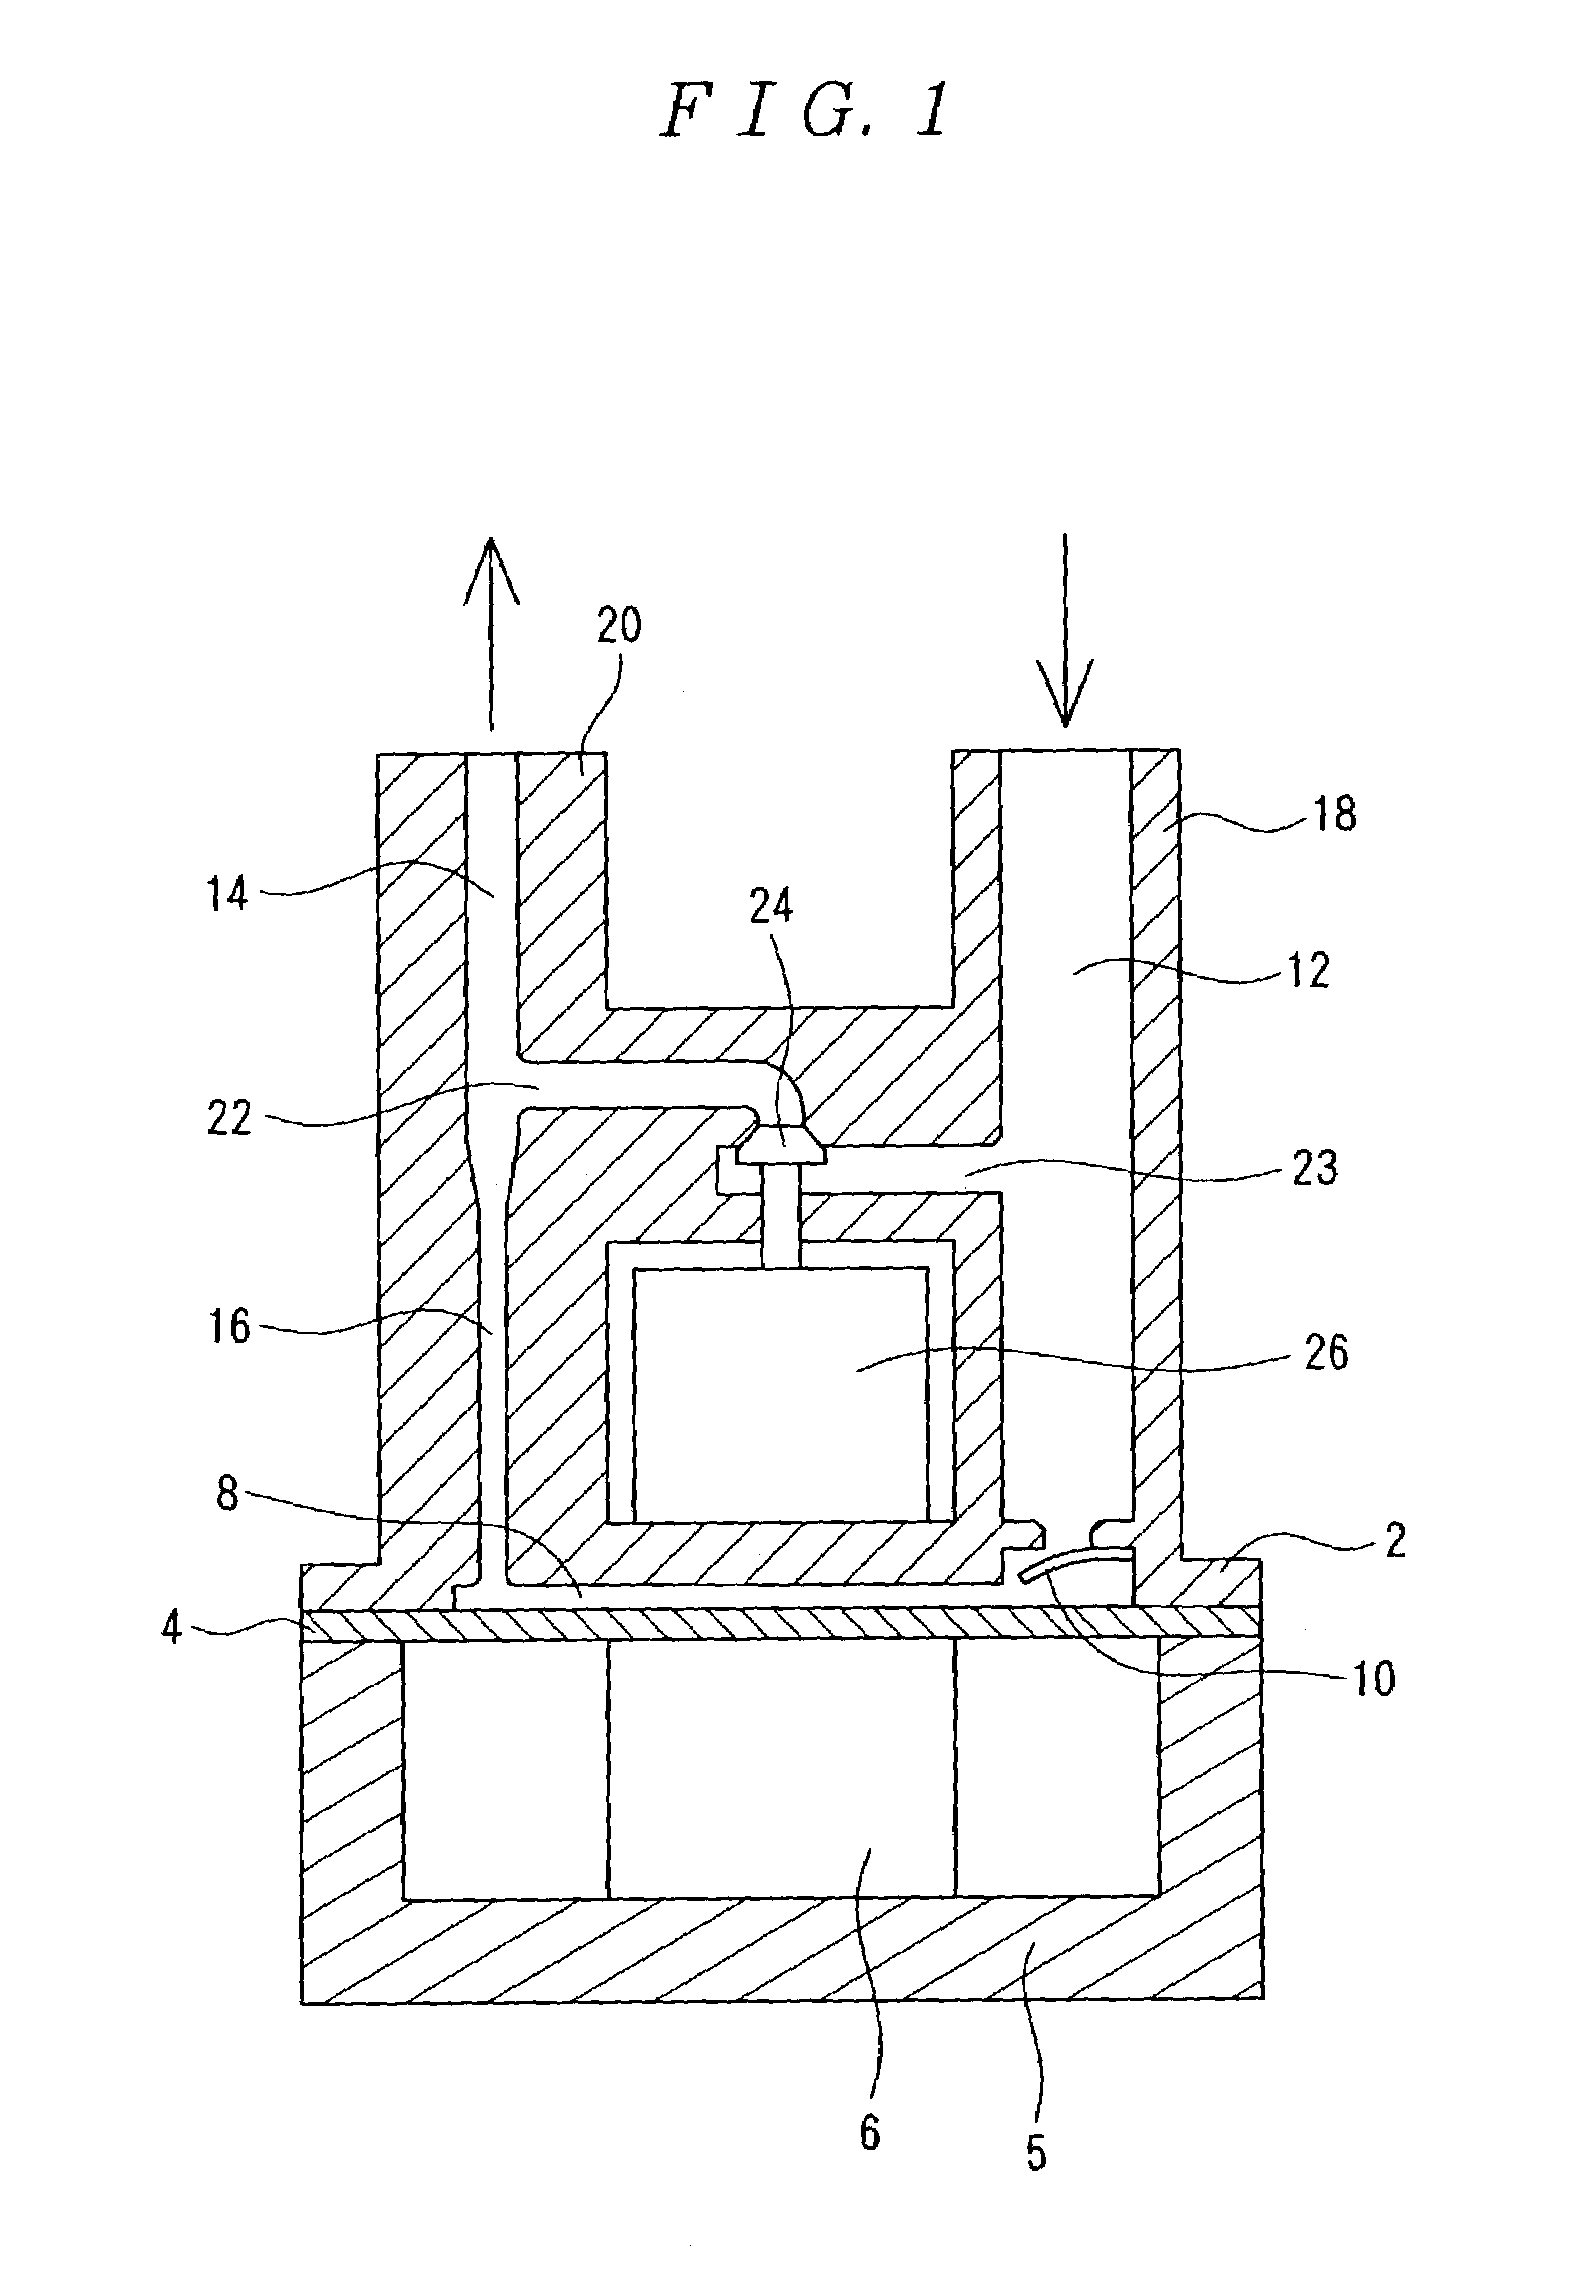 Positive displacement pump with a combined inertance value of the inlet flow path smaller than that of the outlet flow path